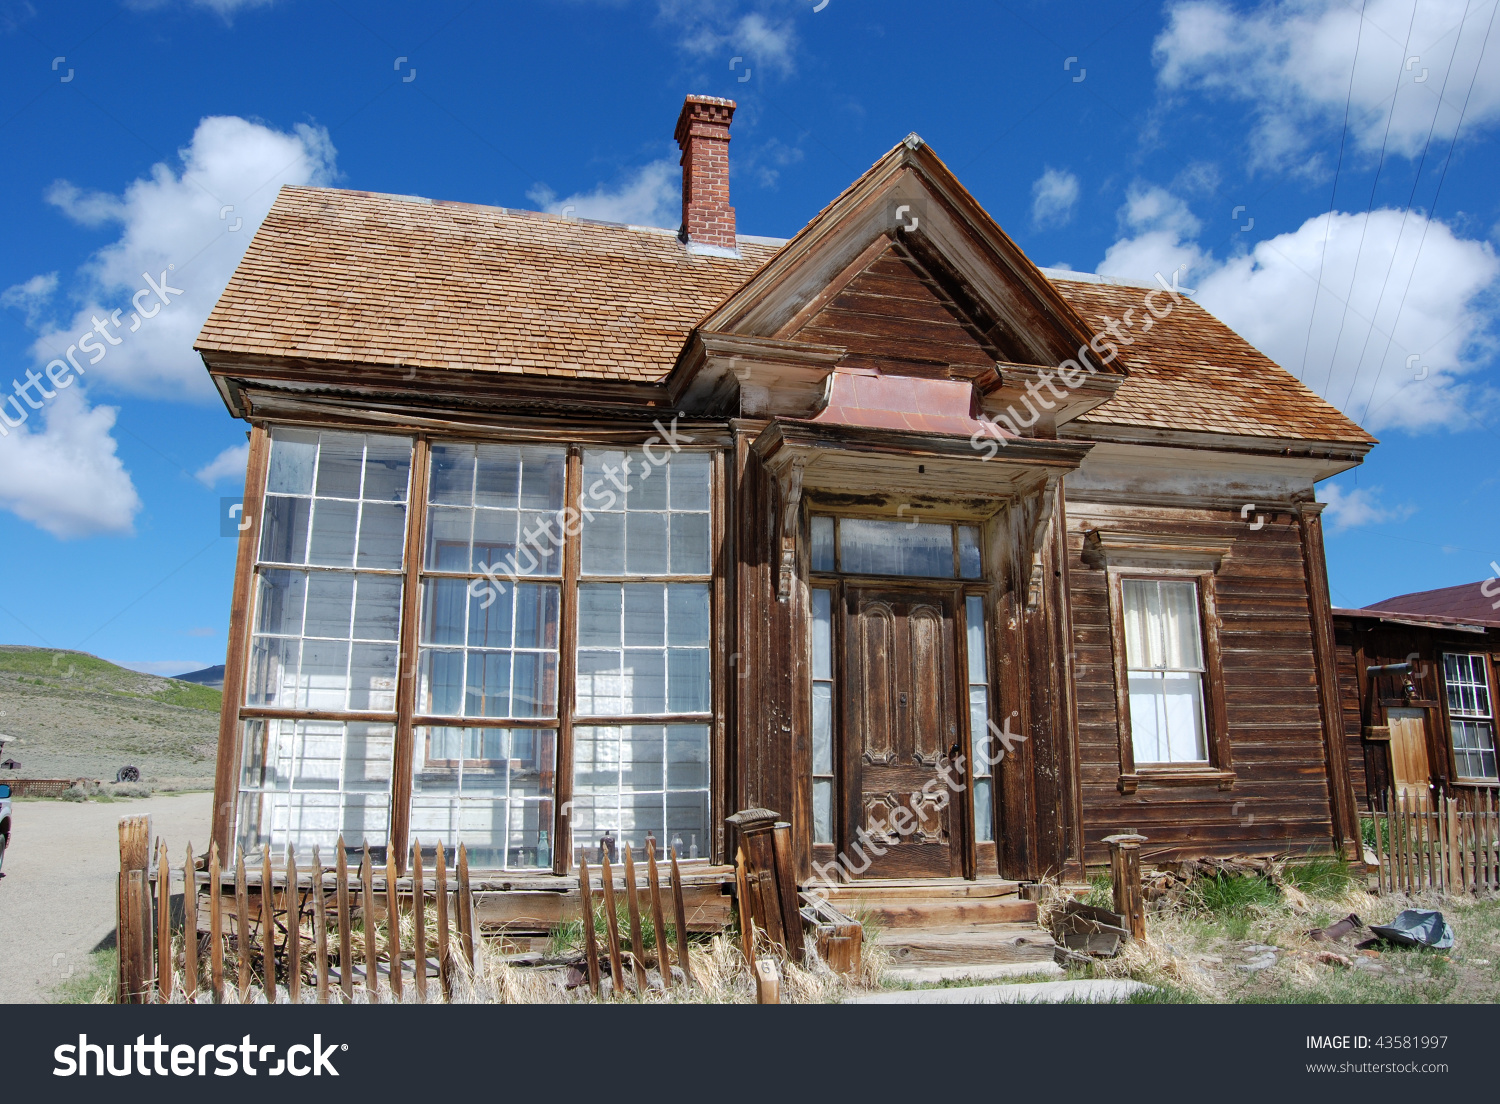 Bodie California Ghost Town Store Stock Photo 43581997.